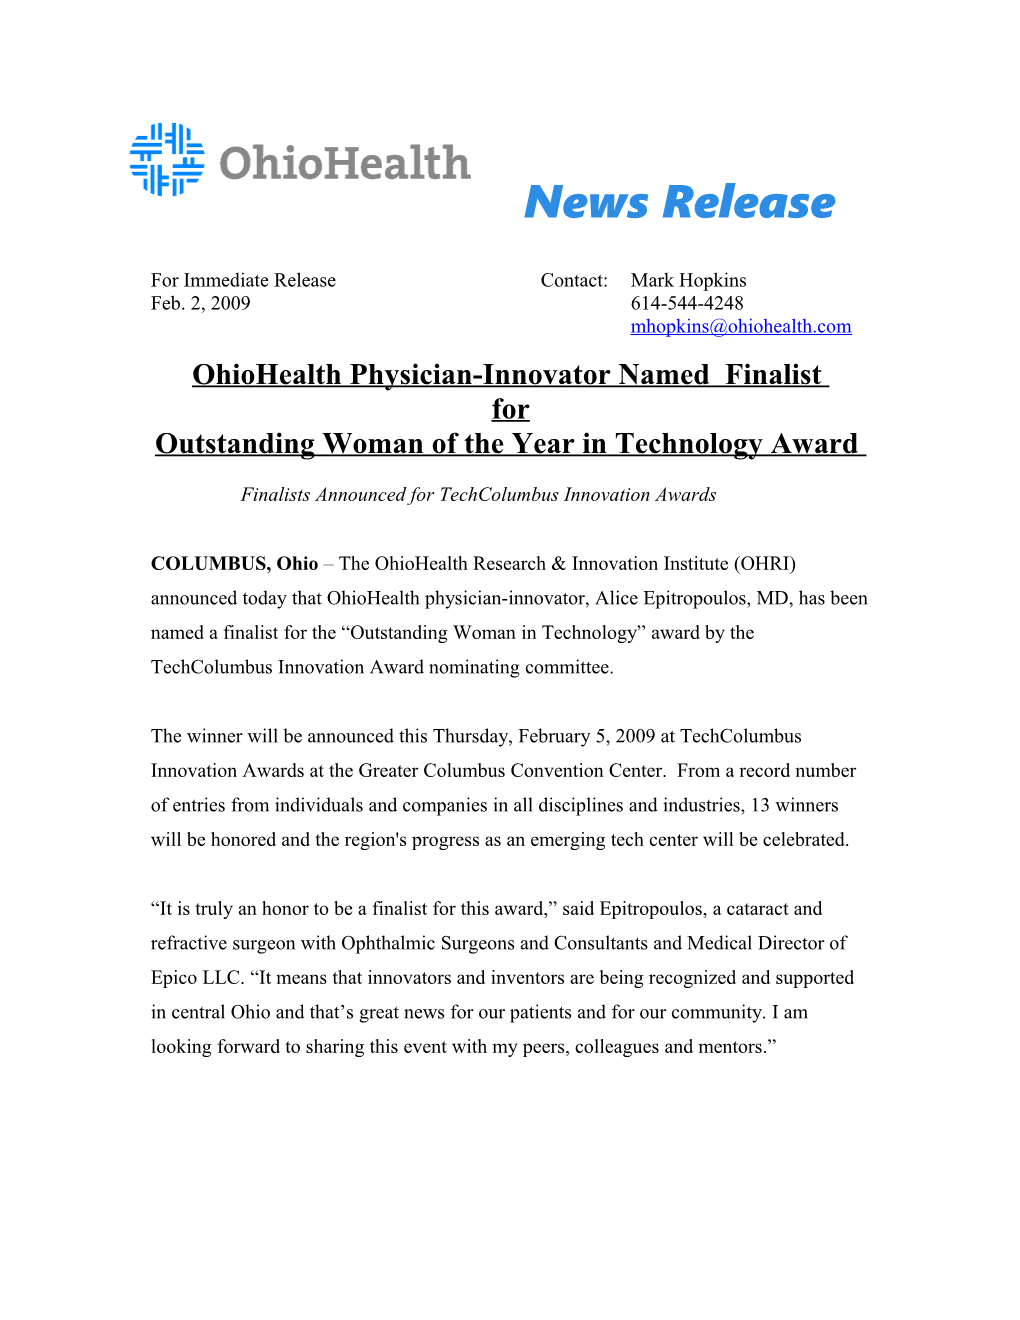 Ohiohealth Physician-Innovator Named Finalist